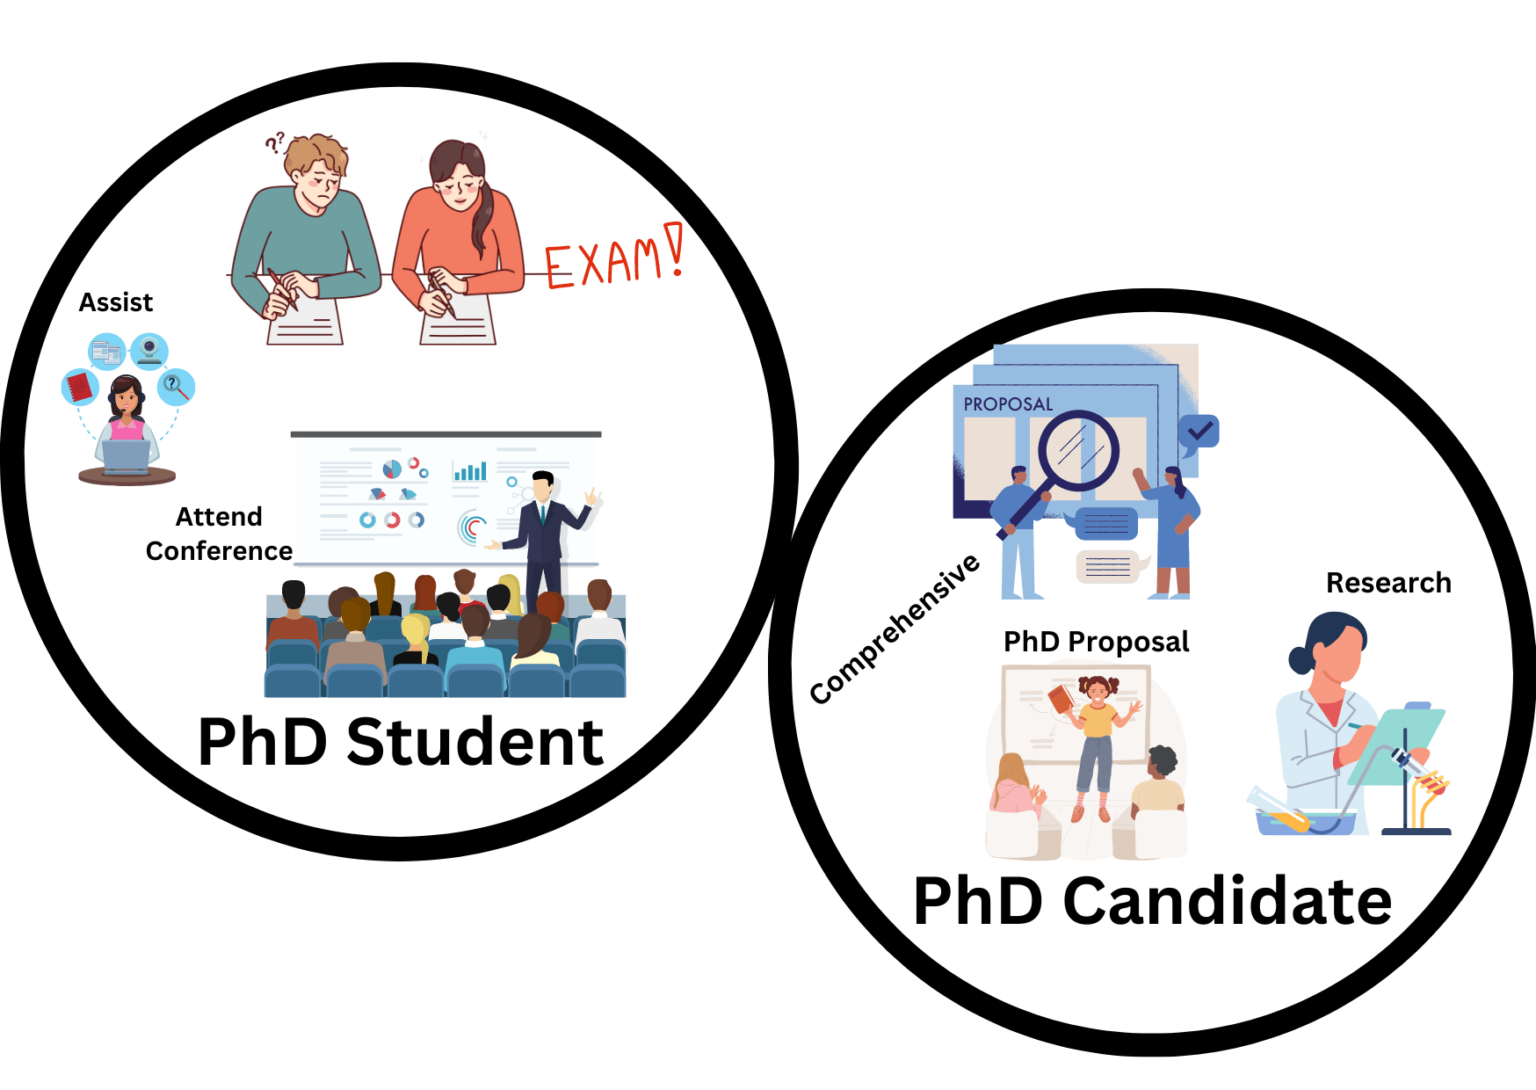 phd candidate and phd student